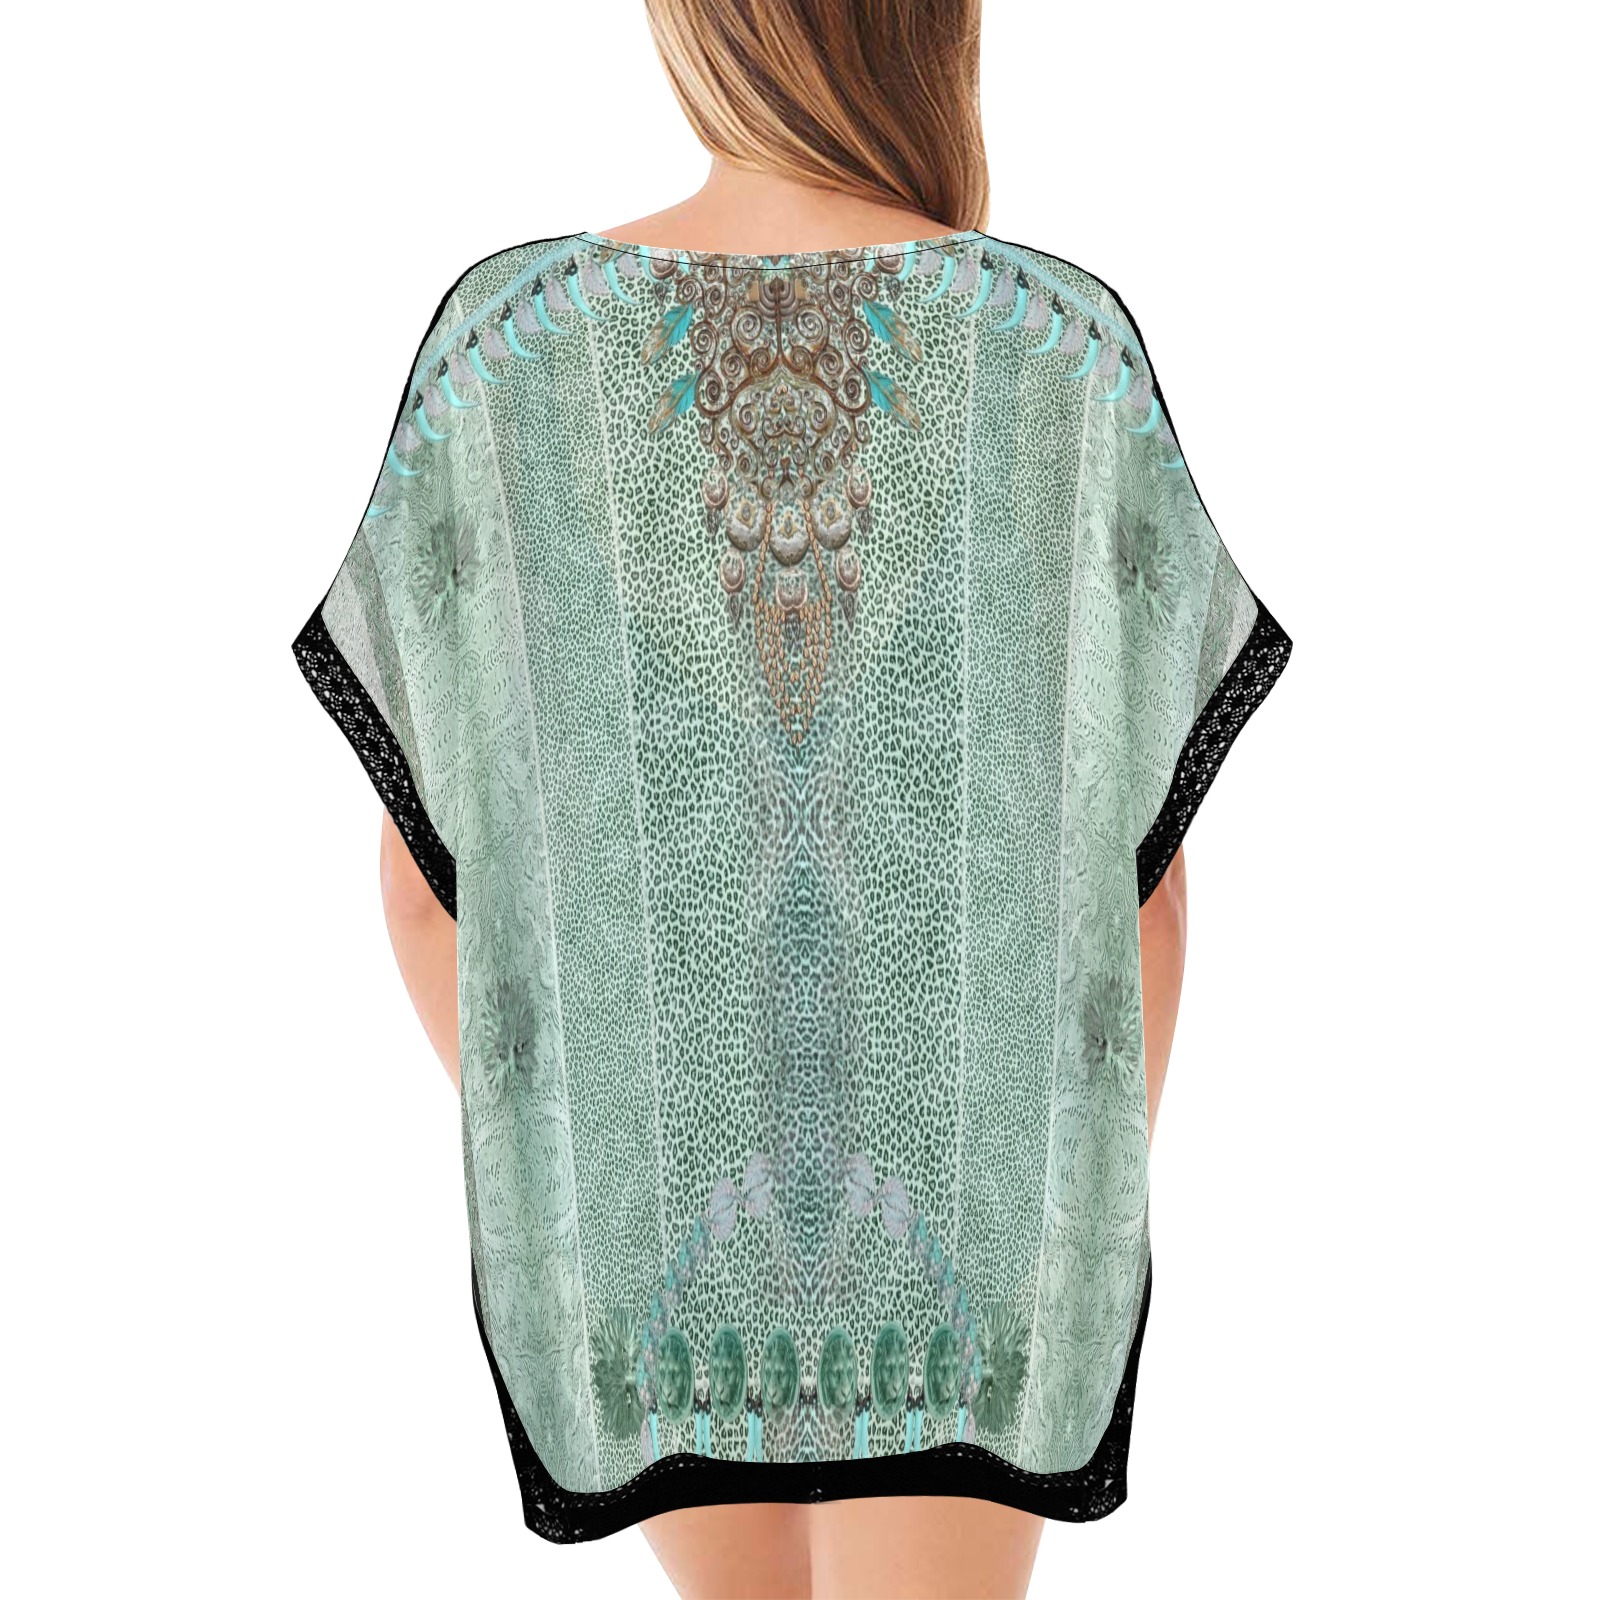 leopard design and feathers green Women's Beach Cover Ups